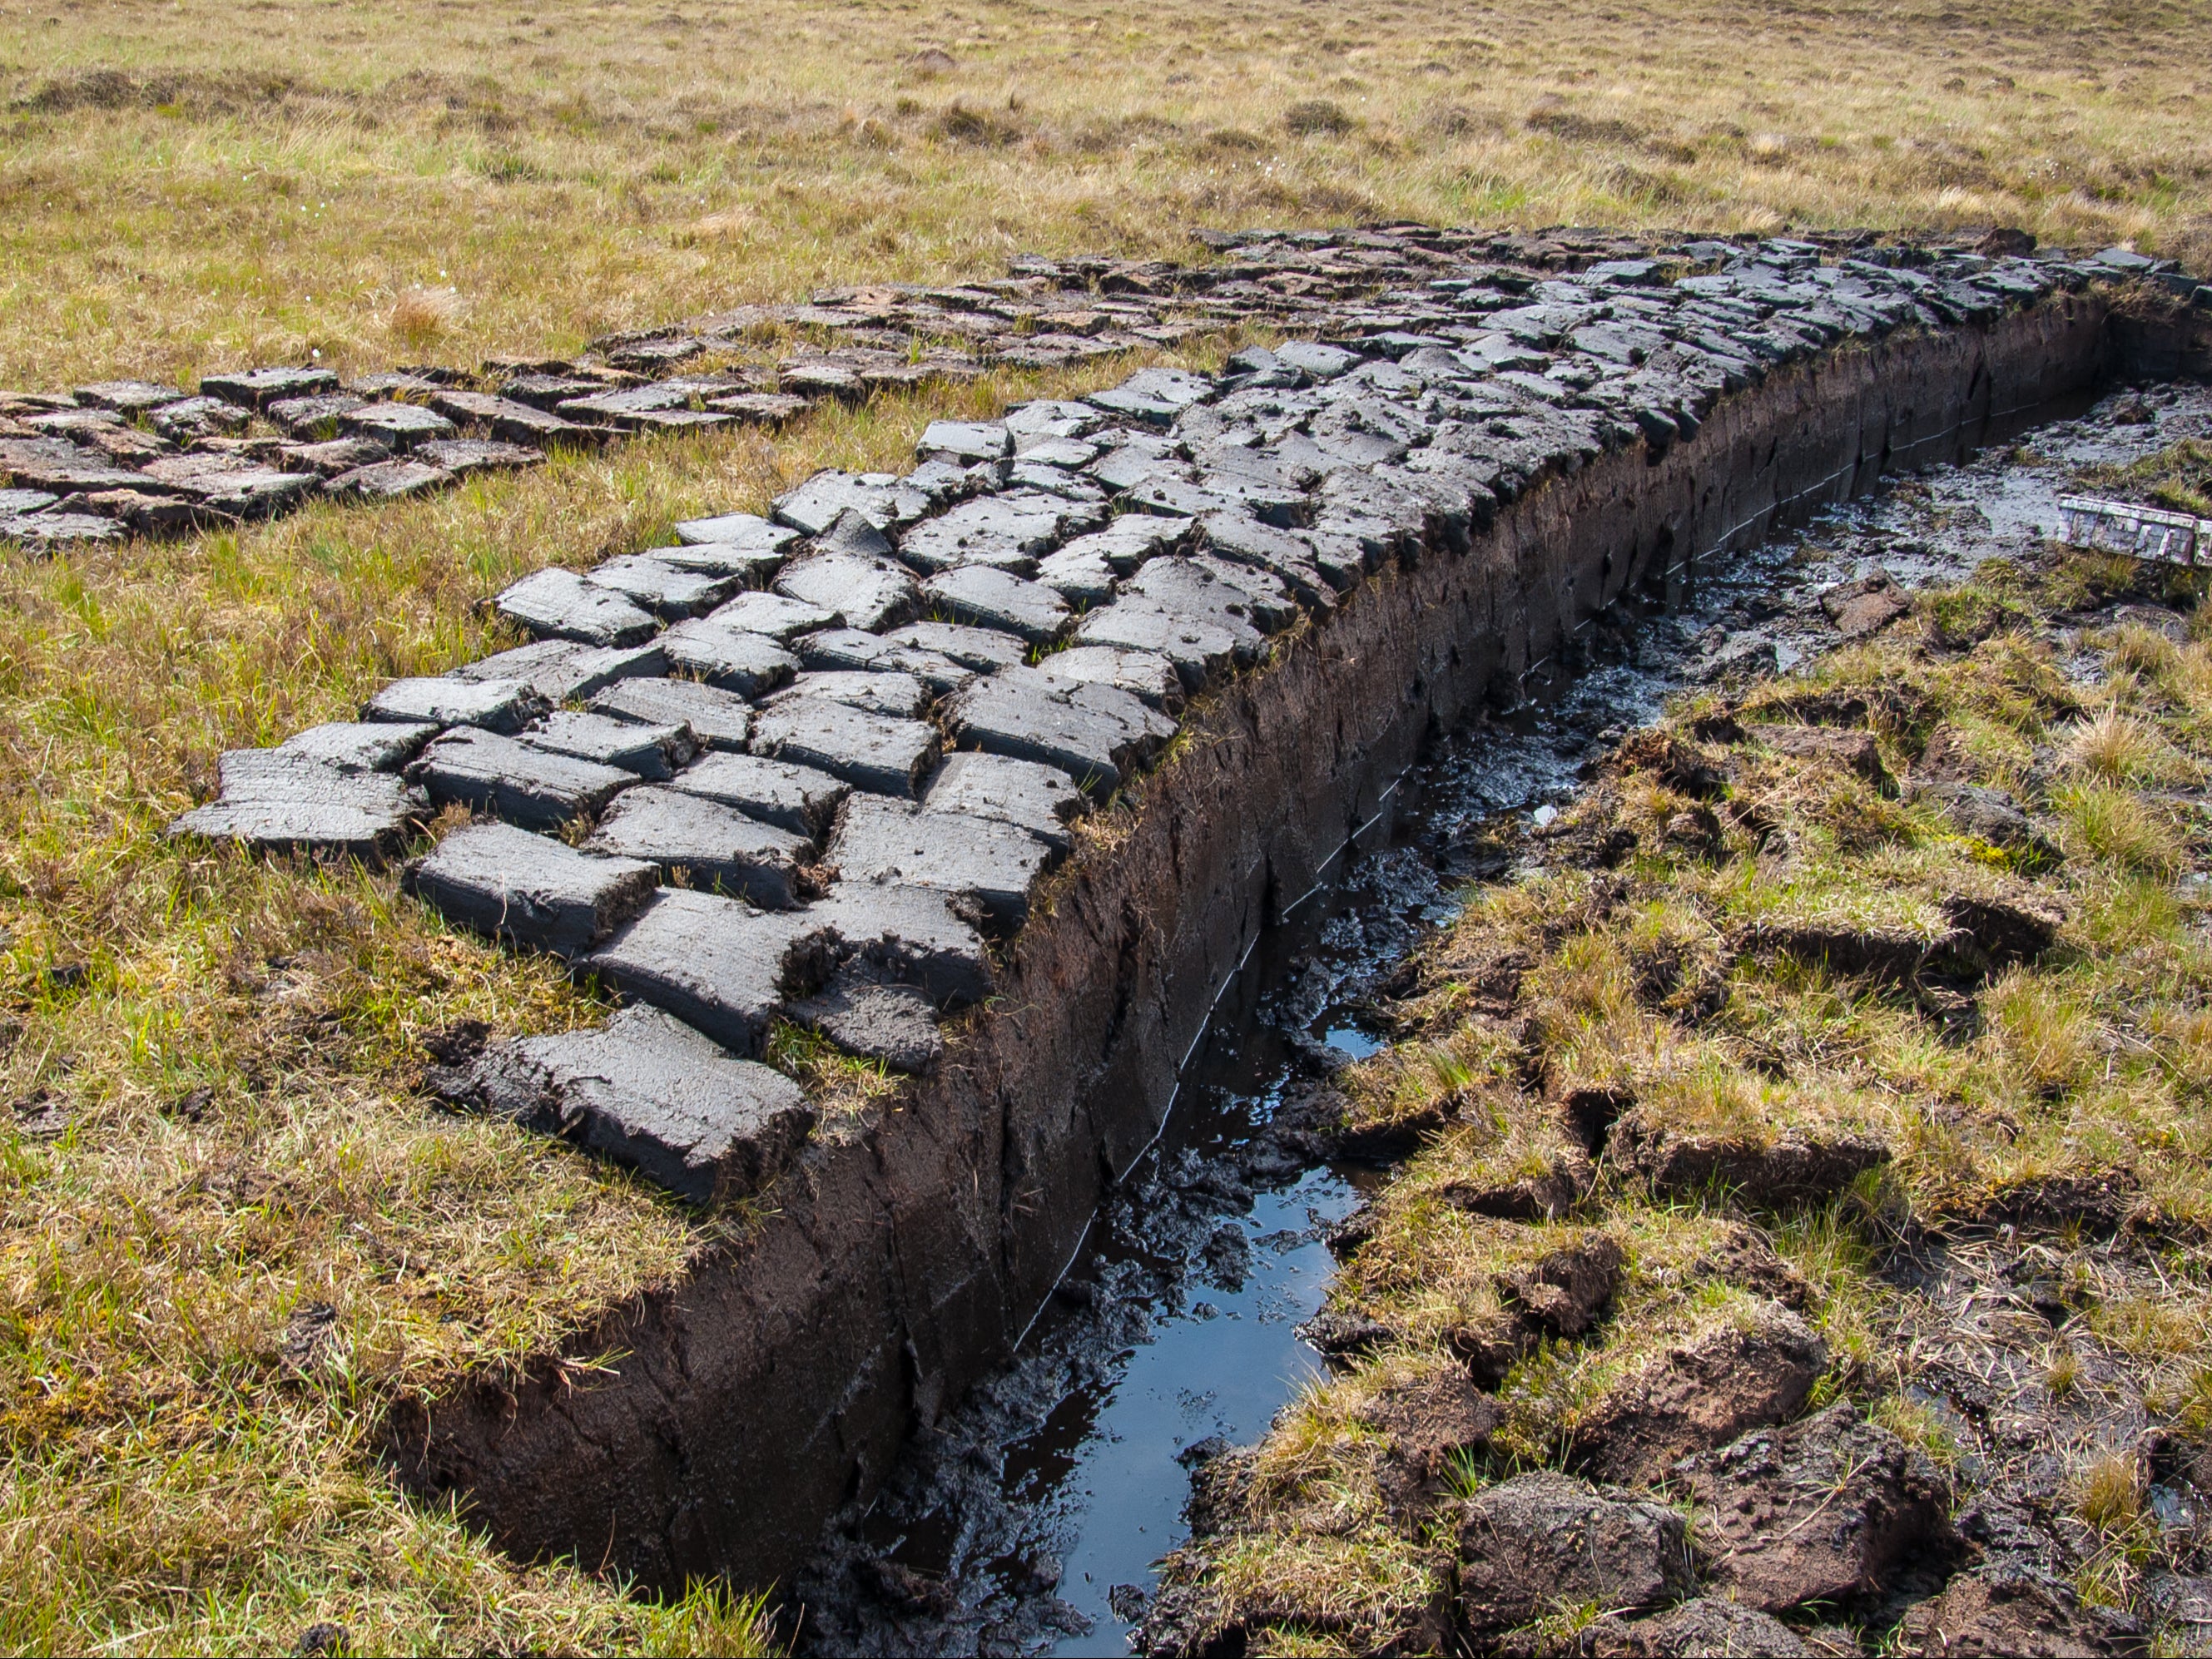 Peat cutting in Scotland. Dried peat burns well and it is also widely used in horticulture